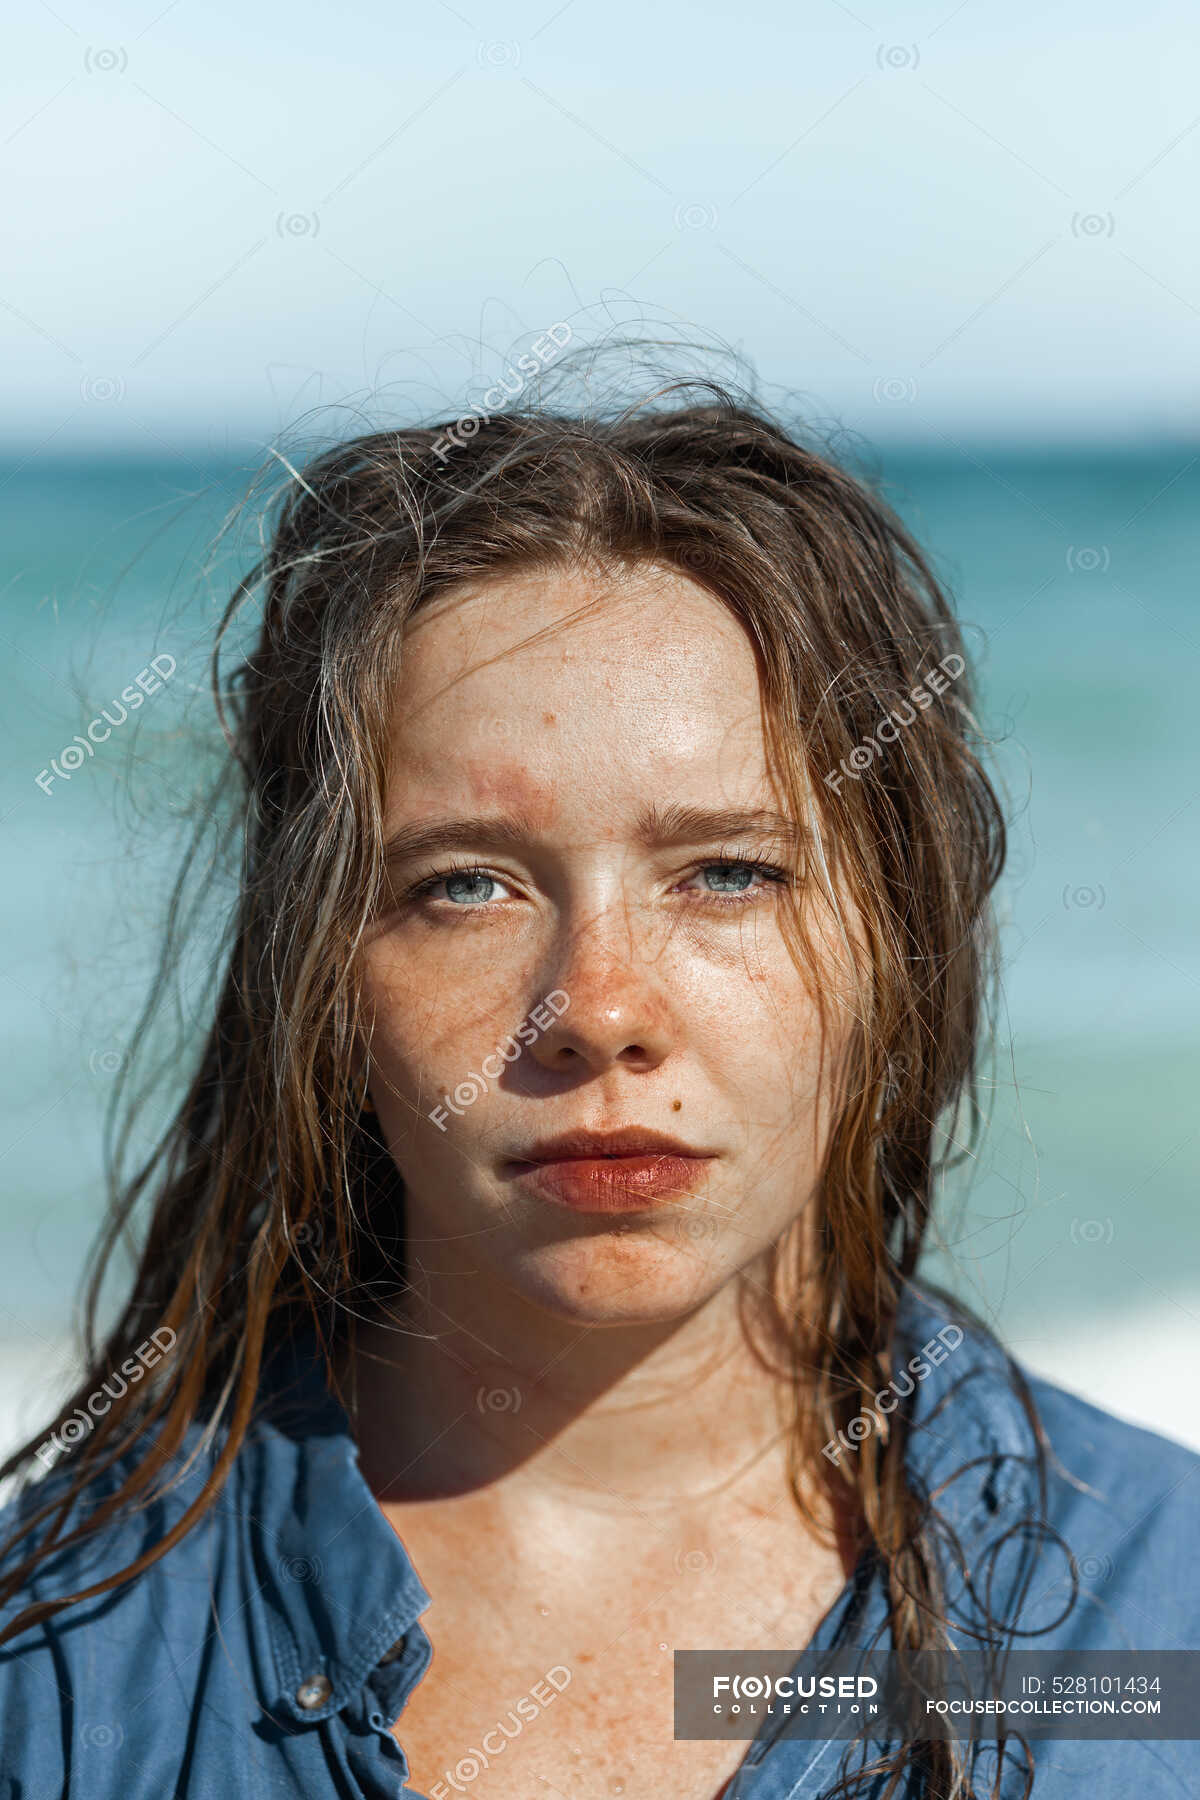 Female in wet shirt and with wet hair standing looking at camera on beach  near sea while enjoying summer day — relax, daylight - Stock Photo |  #528101434